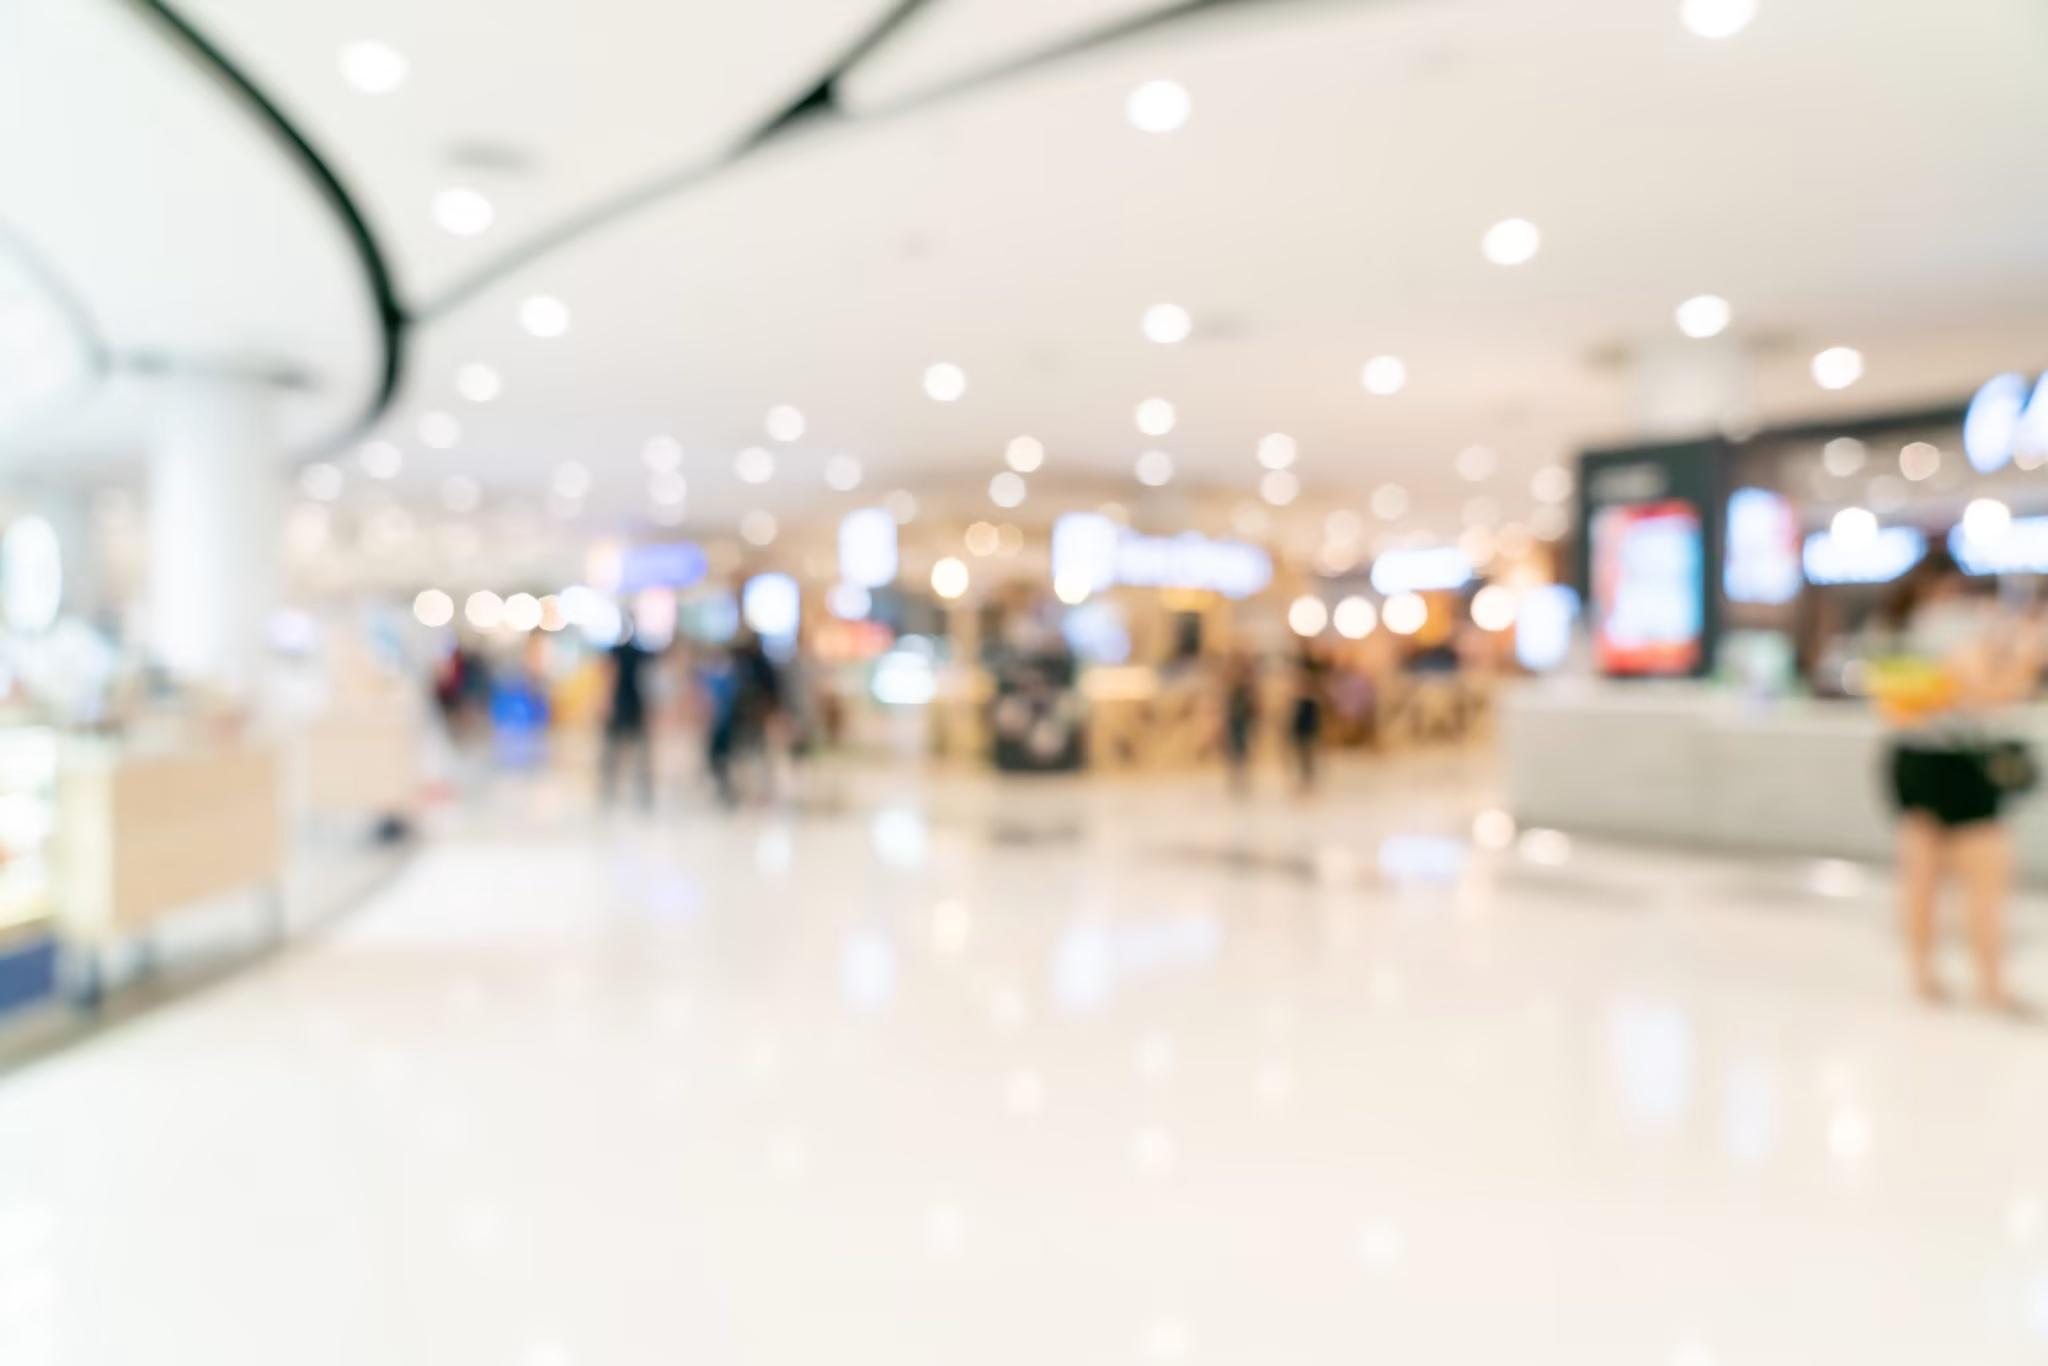 blurred out image of brightly lit shopping mall 